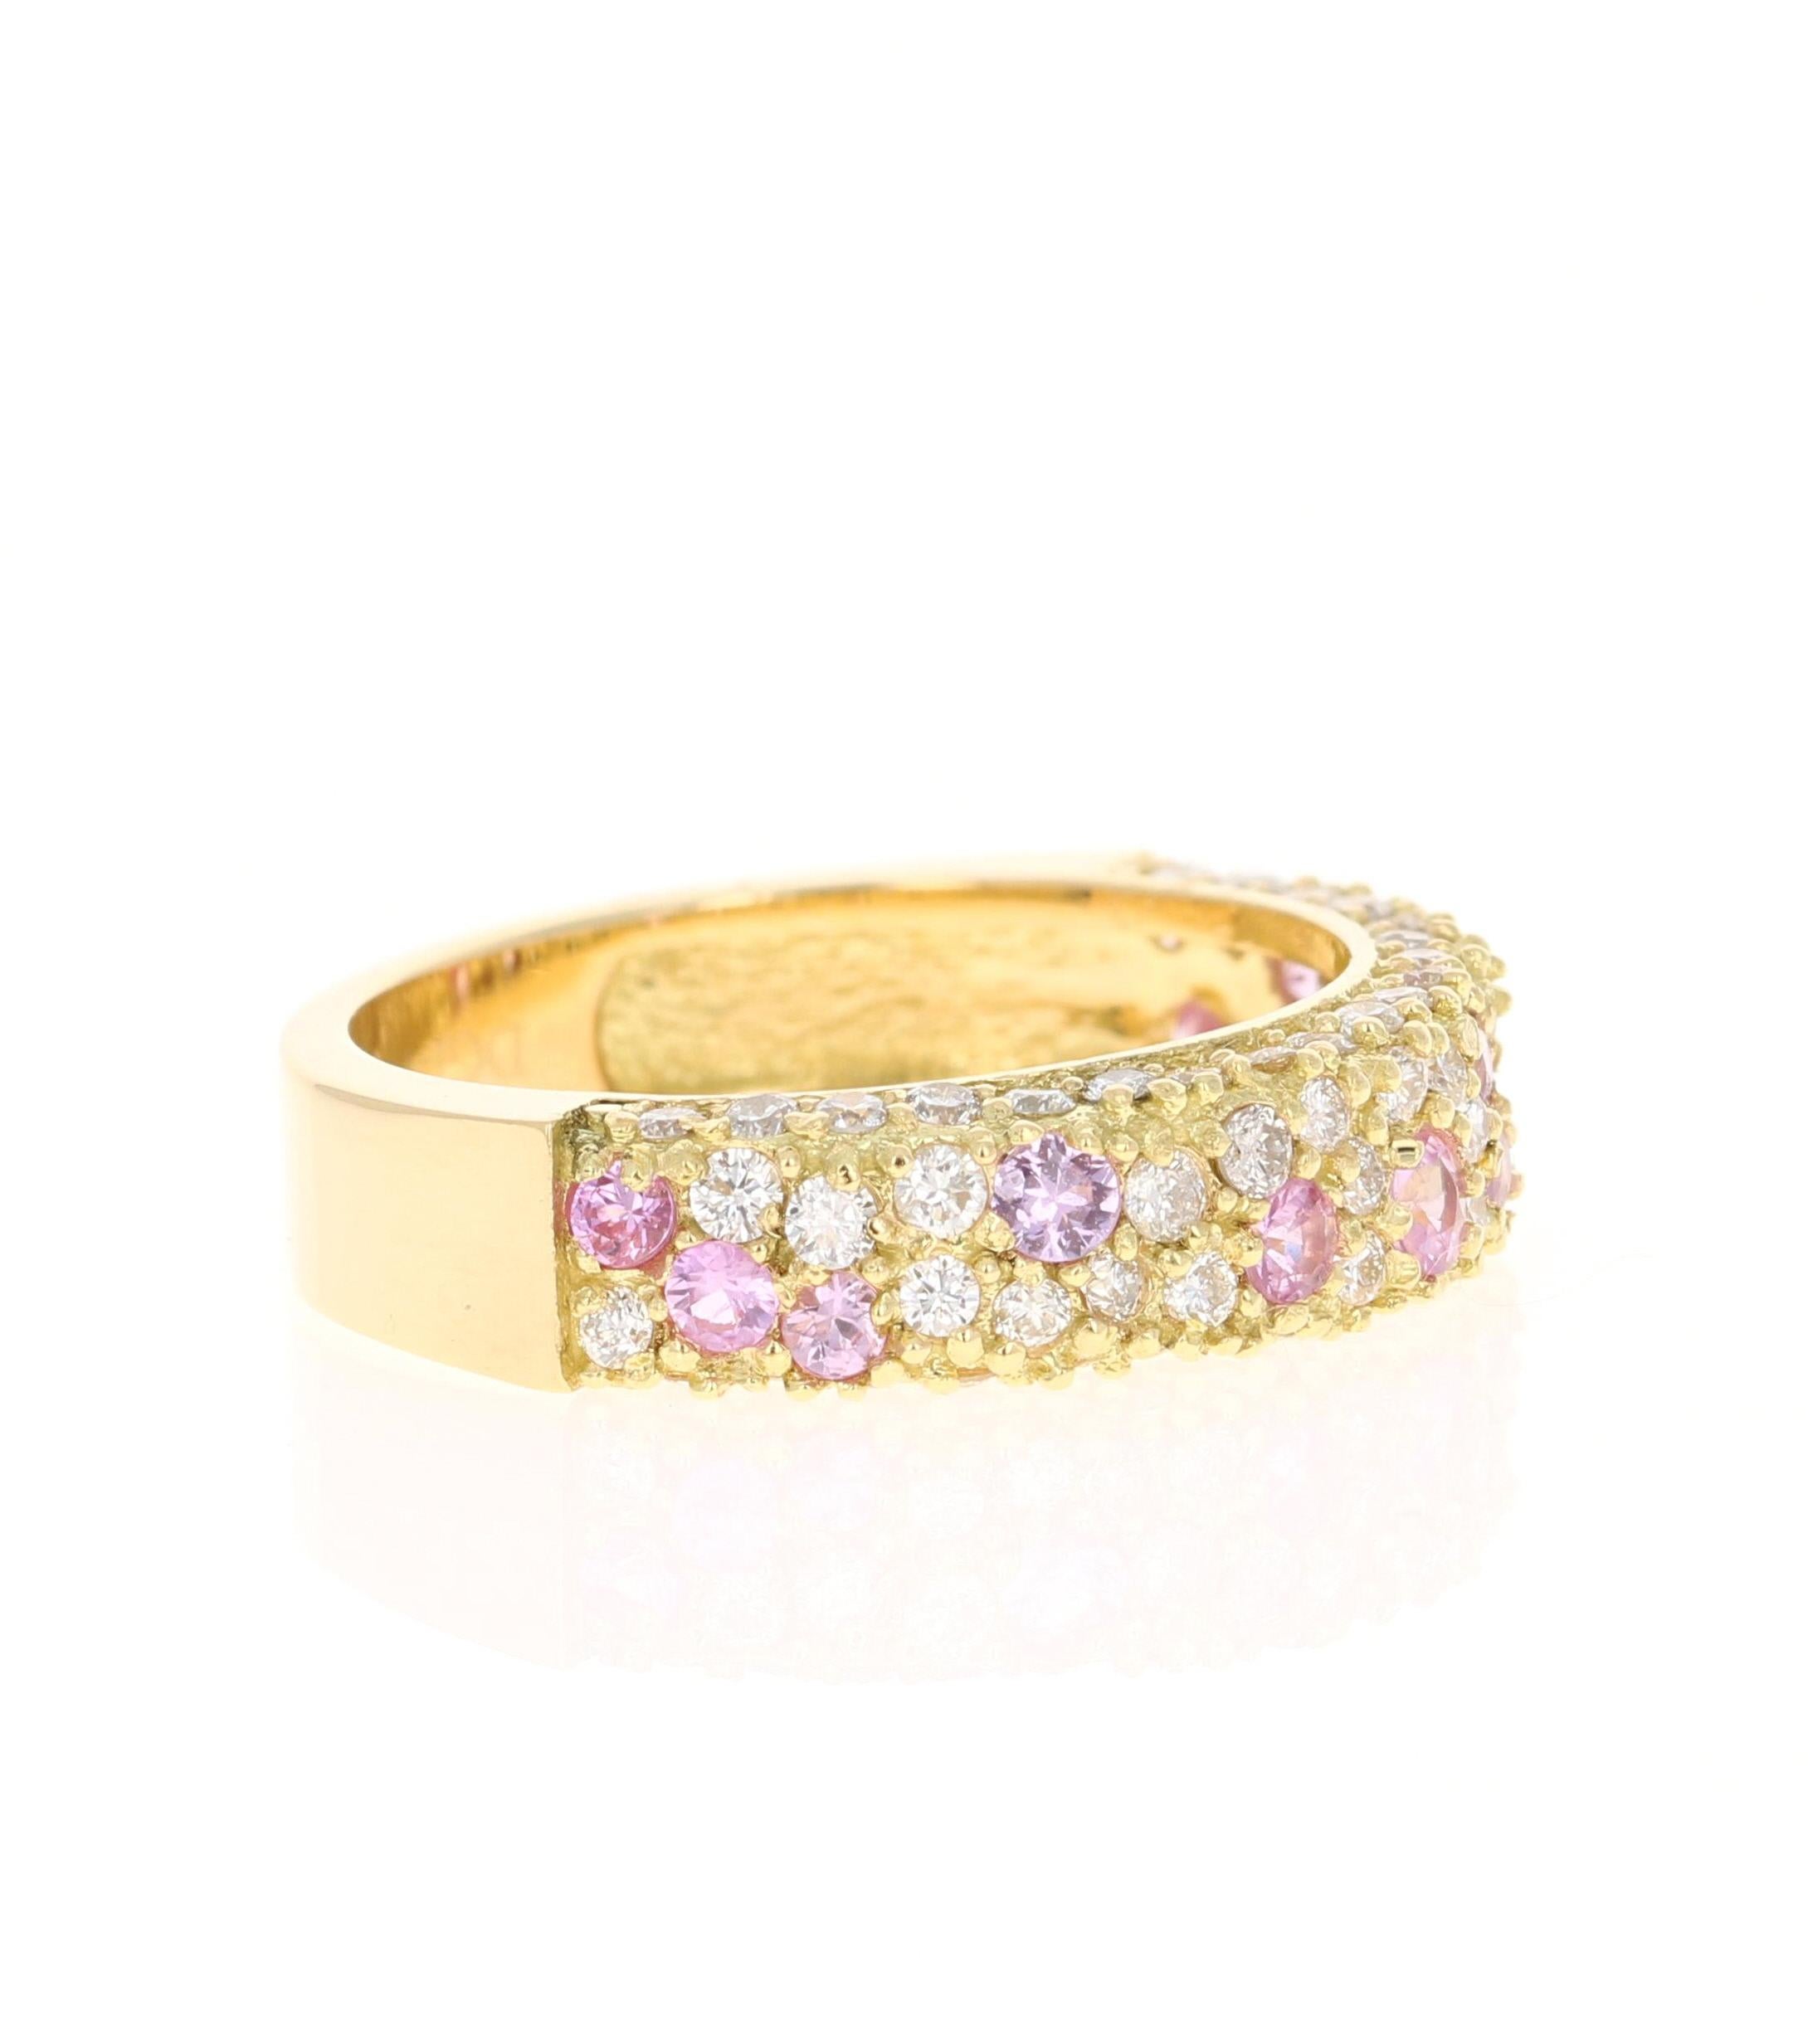 This gorgeous band has 16 Light Pink Sapphires that weigh 0.74 carats and 59 Round Cut Diamonds that weigh 0.80 carats. (Clarity: VS, Color: H) The total carat weight of the ring is 1.54 carats. 

The ring is designed in 18 Karat Yellow Gold and